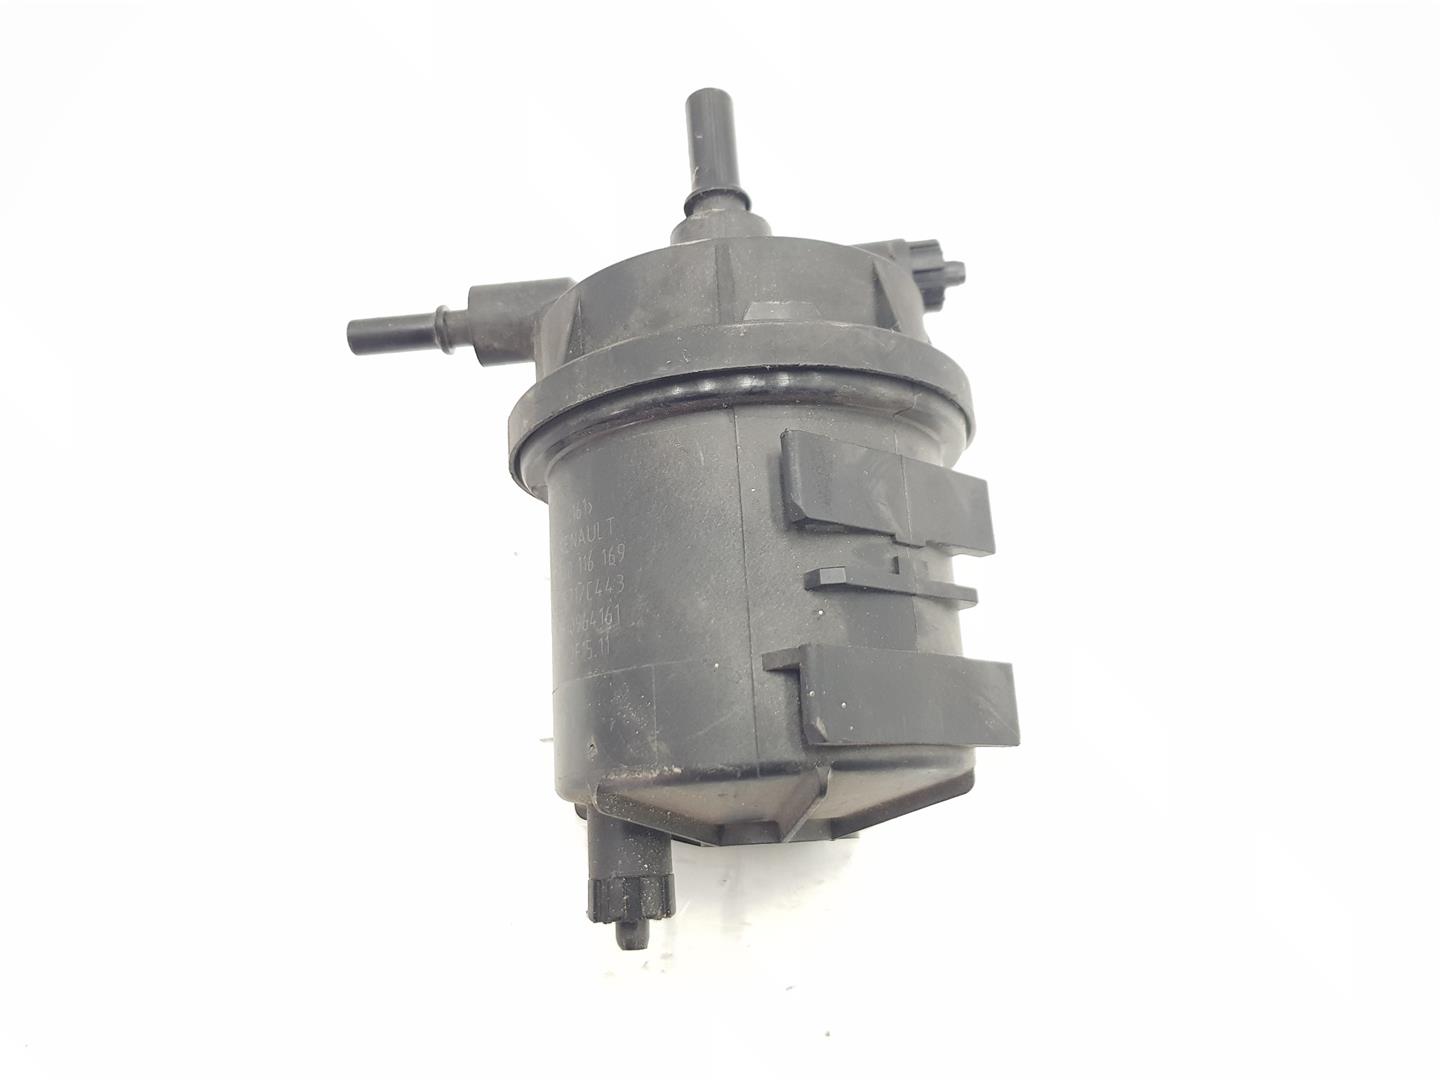 RENAULT Kangoo 1 generation (1998-2009) Other Engine Compartment Parts 7700116169, 6610964161 19808598